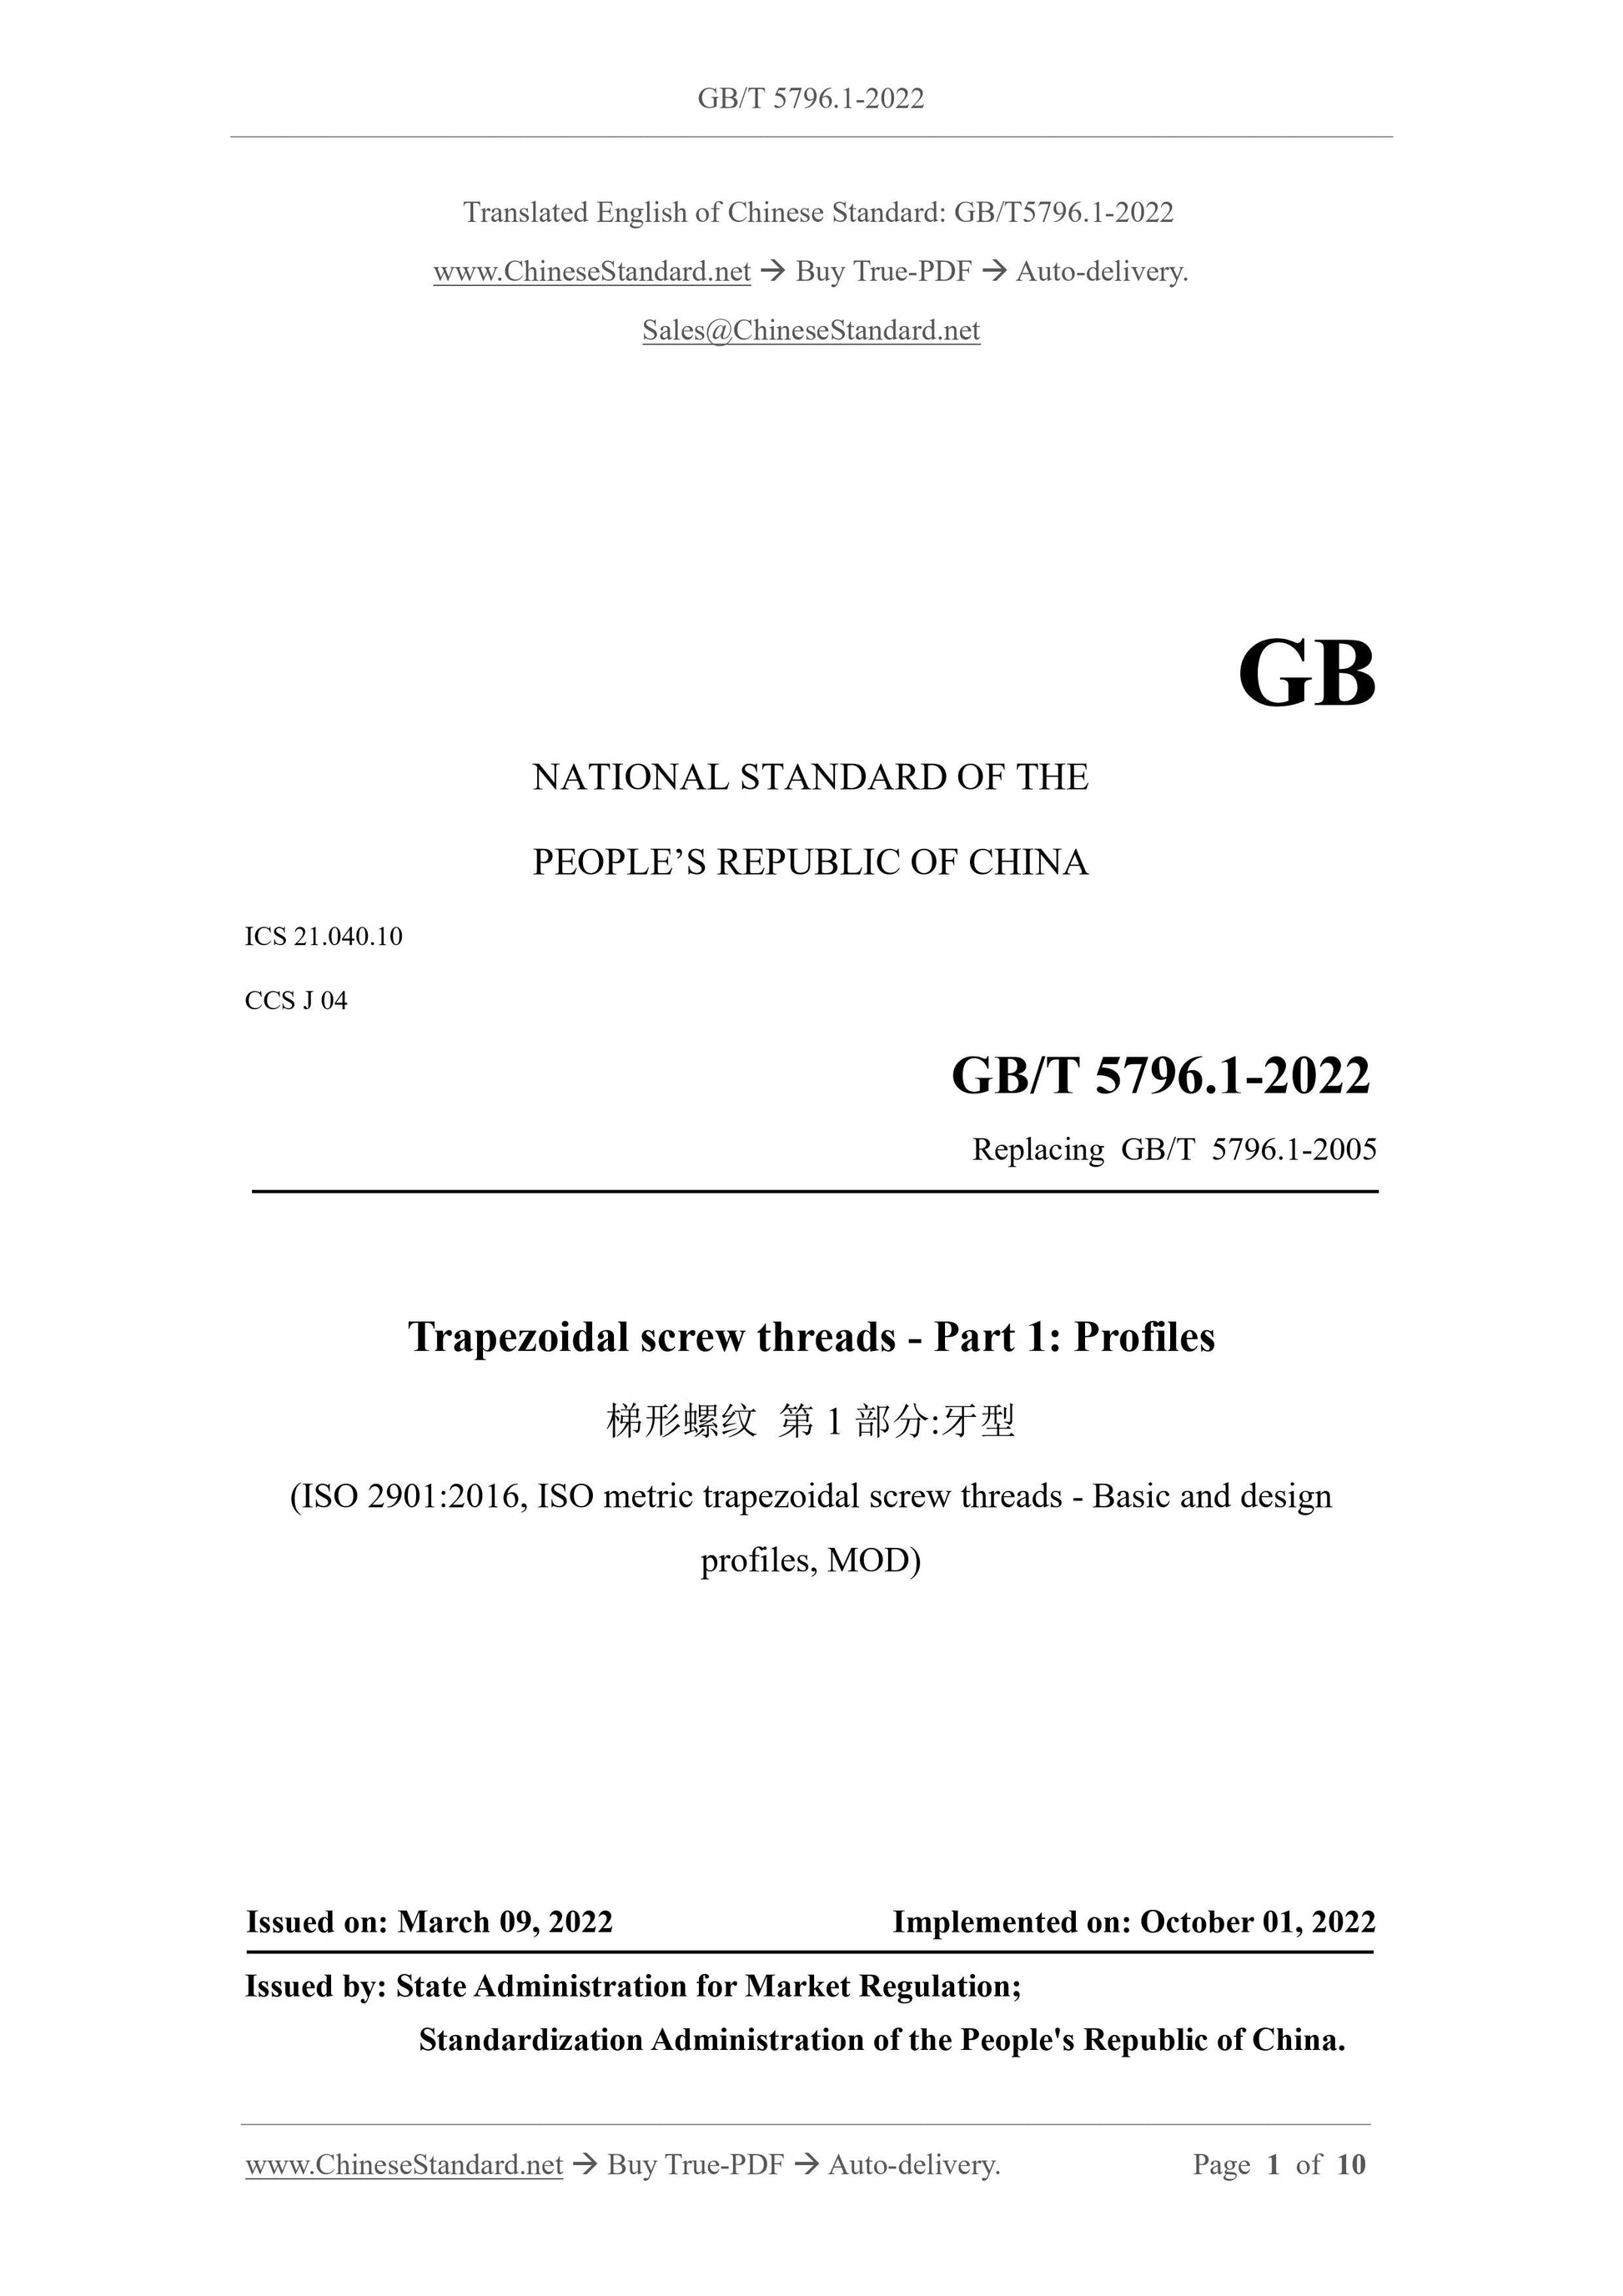 GB/T 5796.1-2022 Page 1